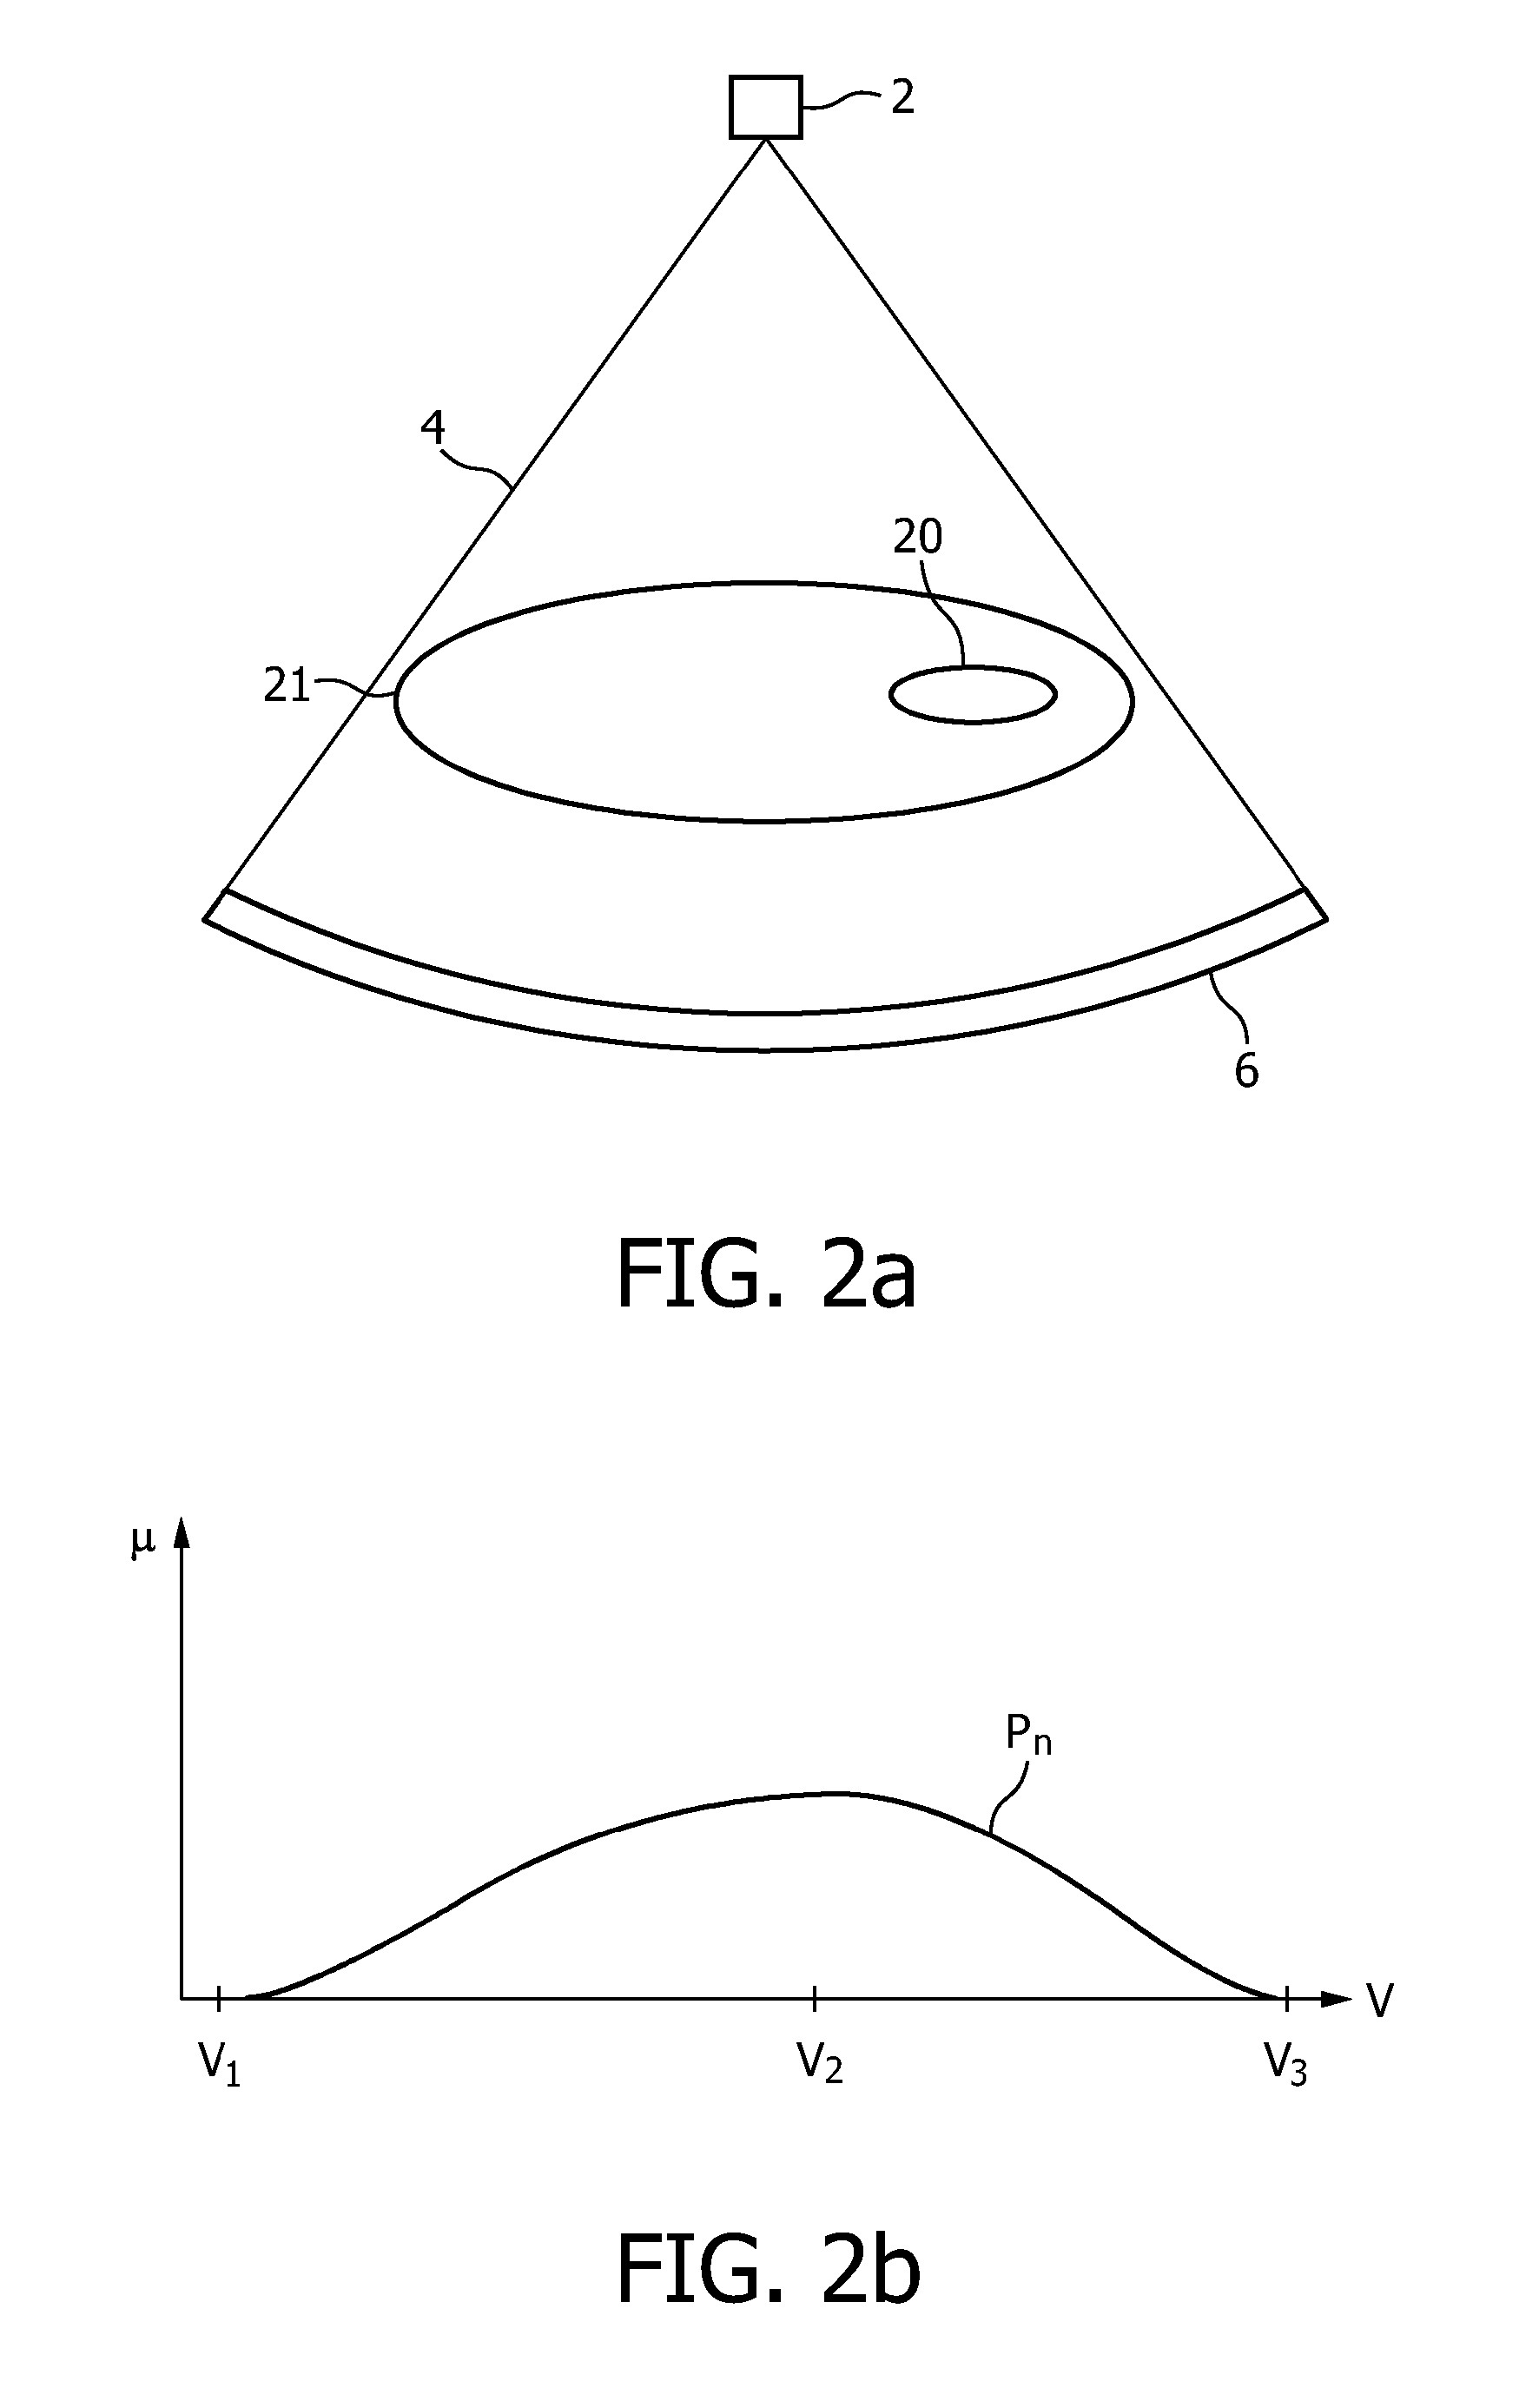 Imaging system for imaging an object